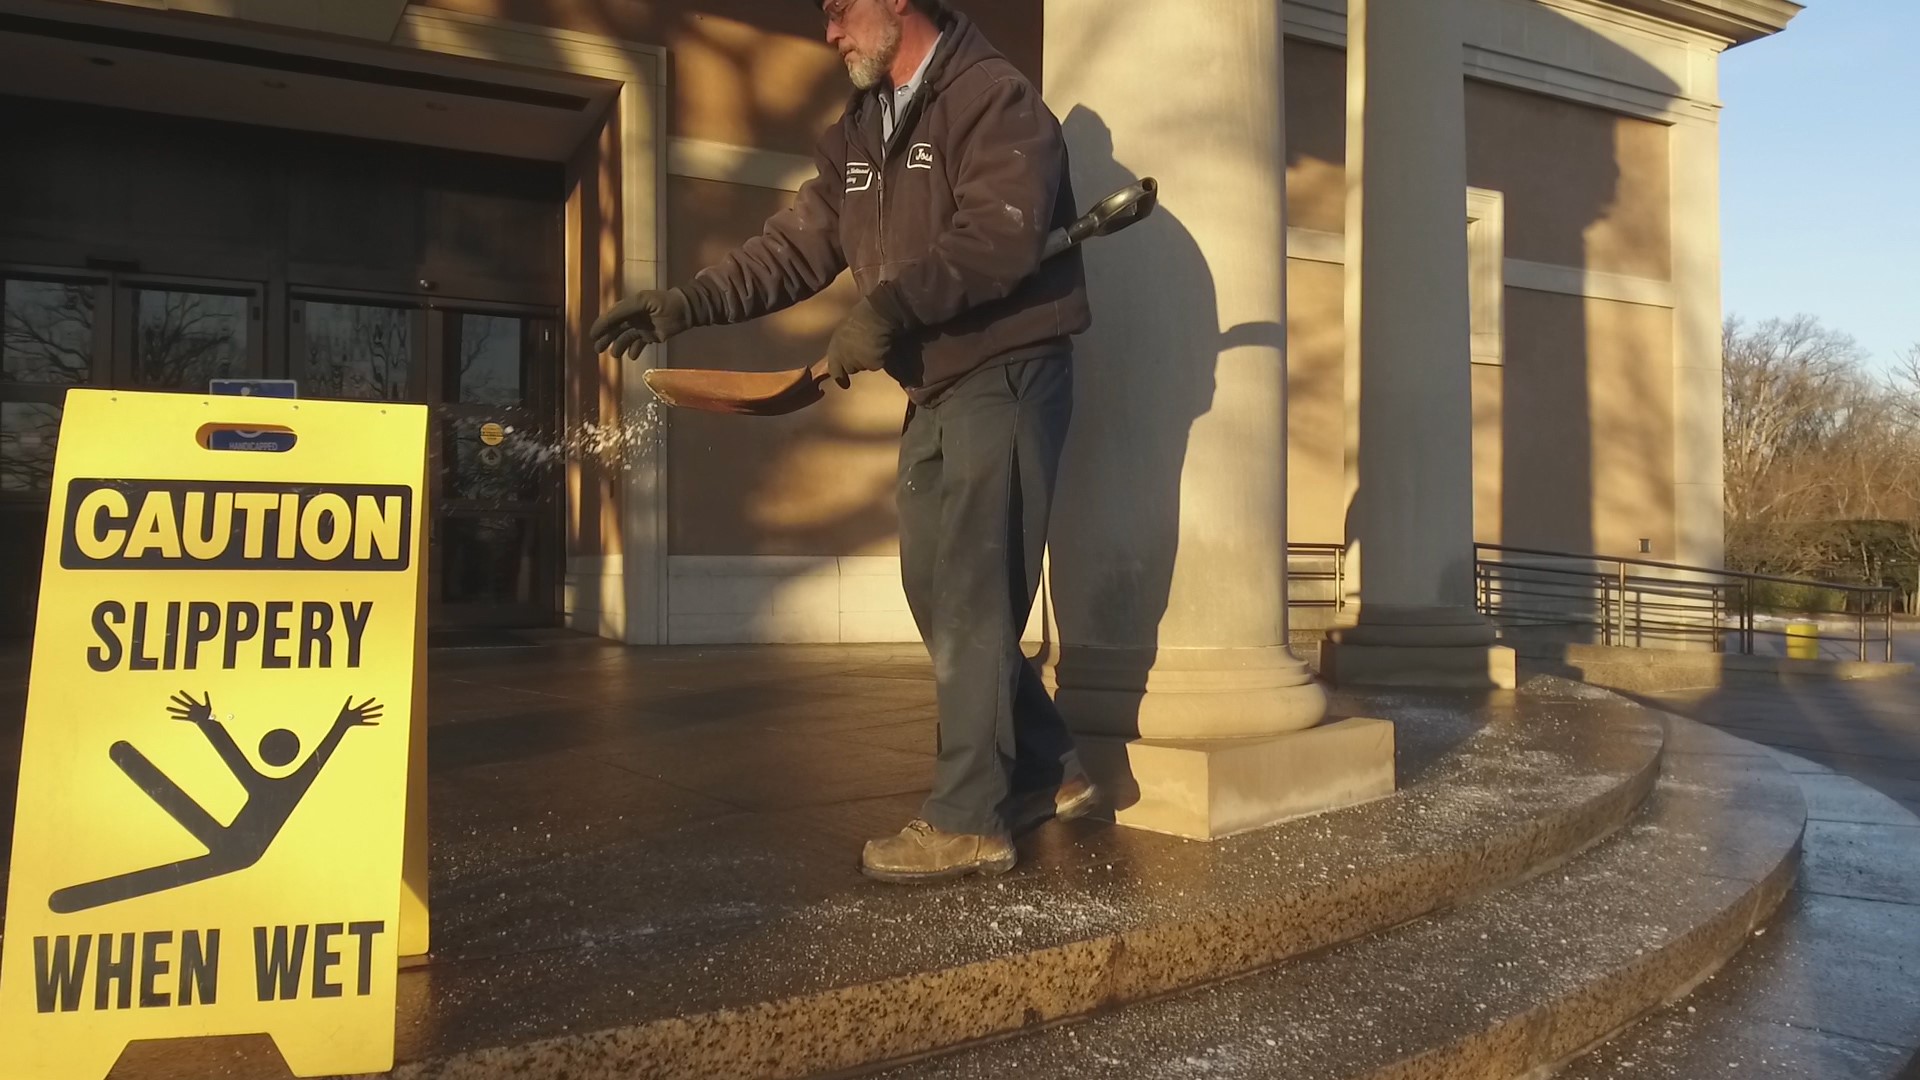 An Arlington National Cemetery employee removes snow and ice in front of the Welcome Center, and a sign reminds visitors of slipping hazards